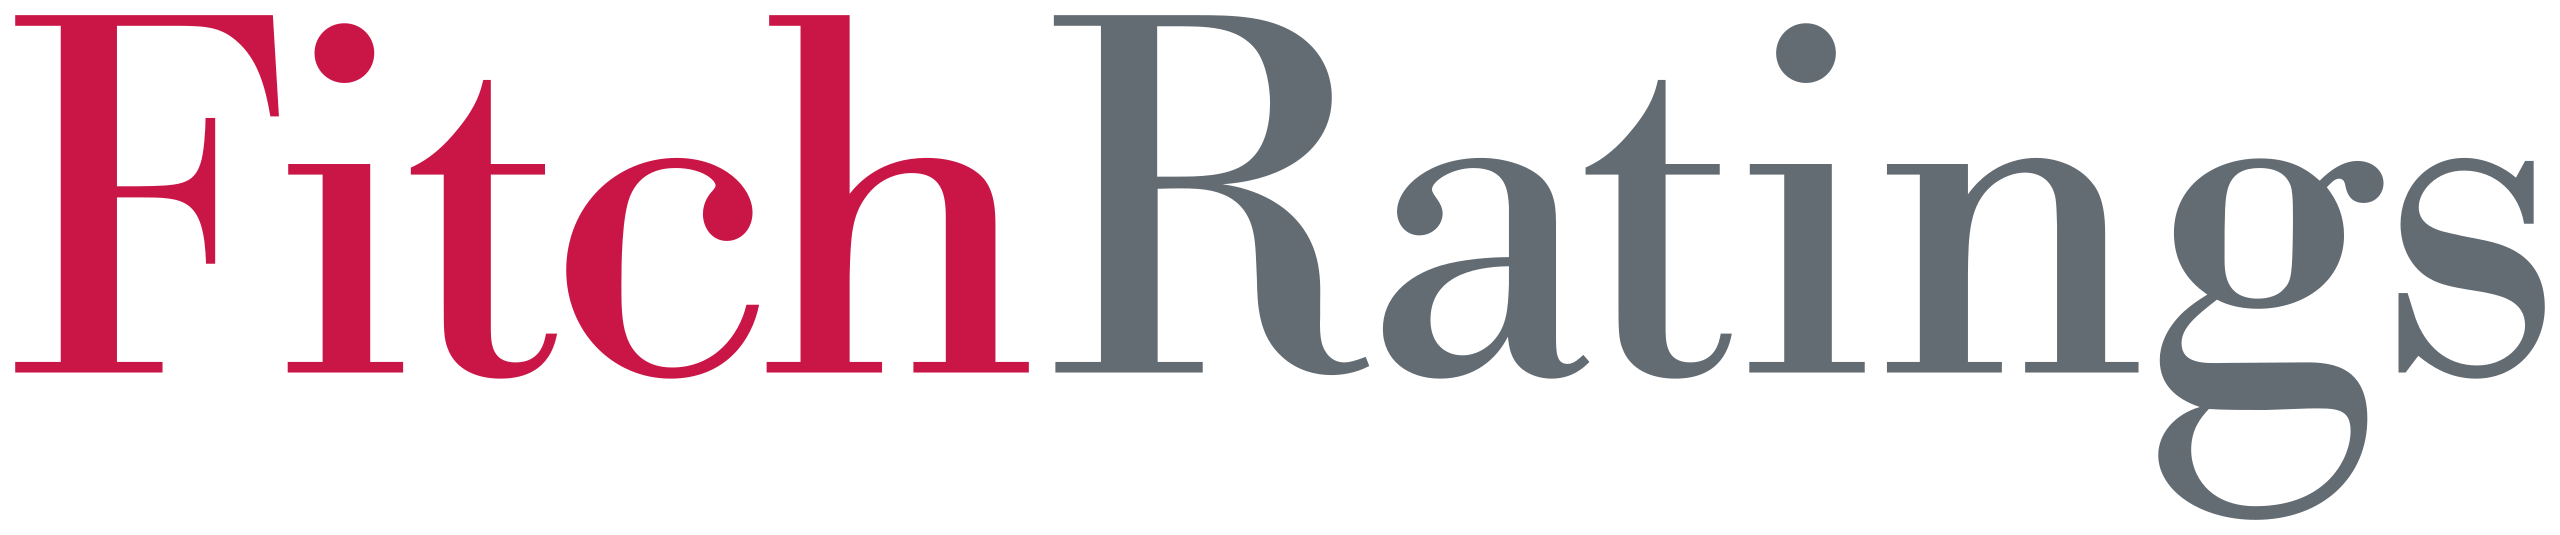 FitchRatings logo